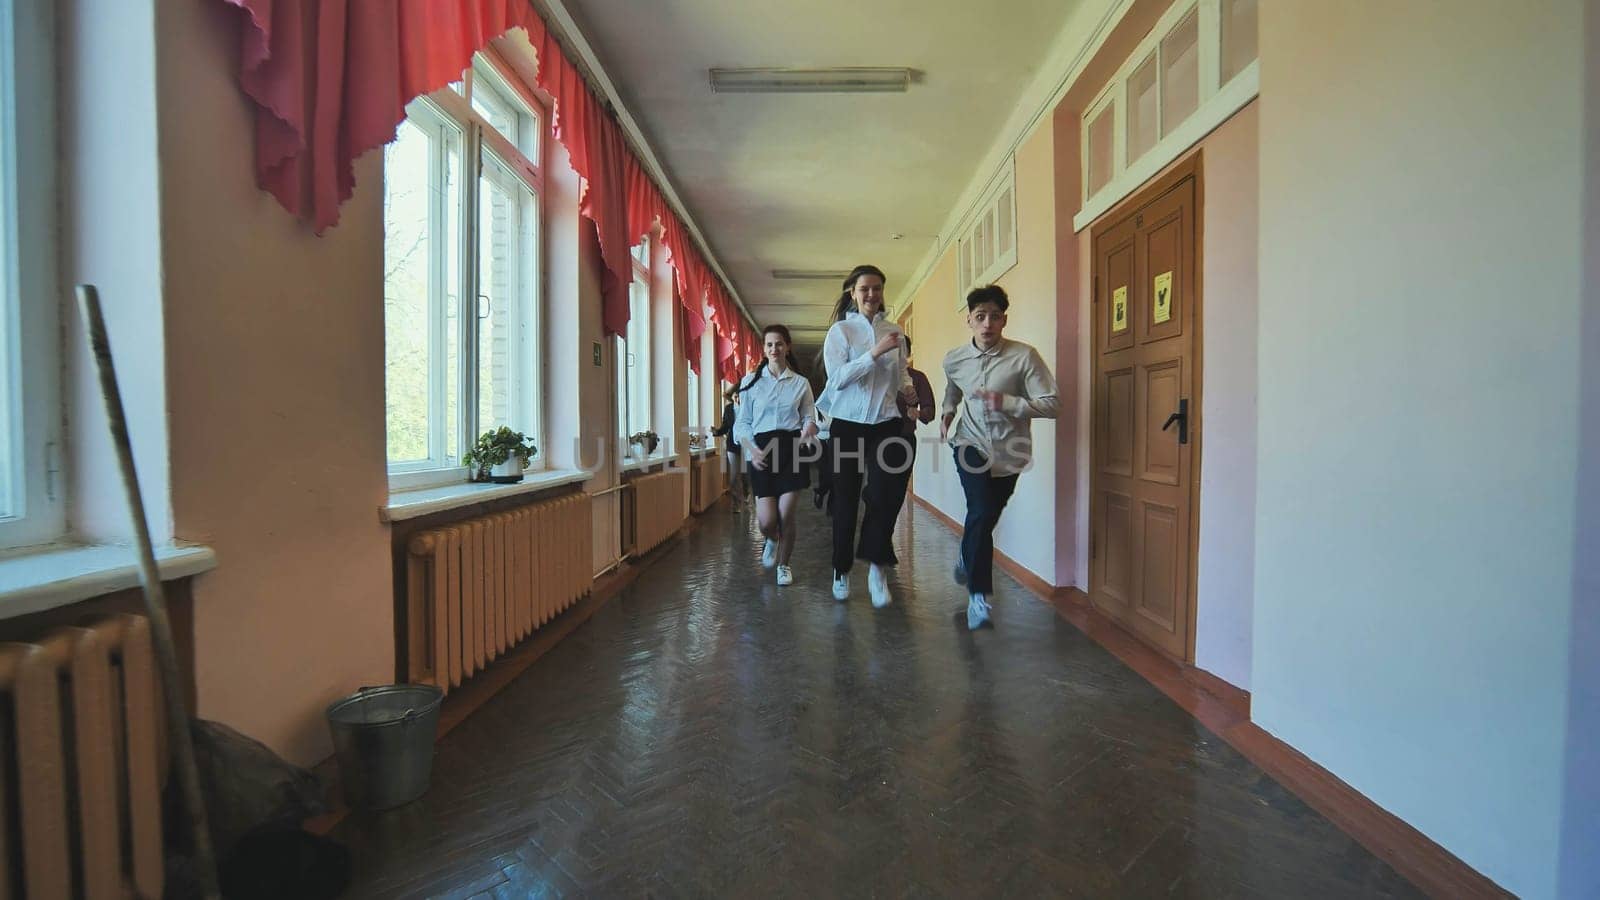 The students are running down the hallway of the school. by DovidPro